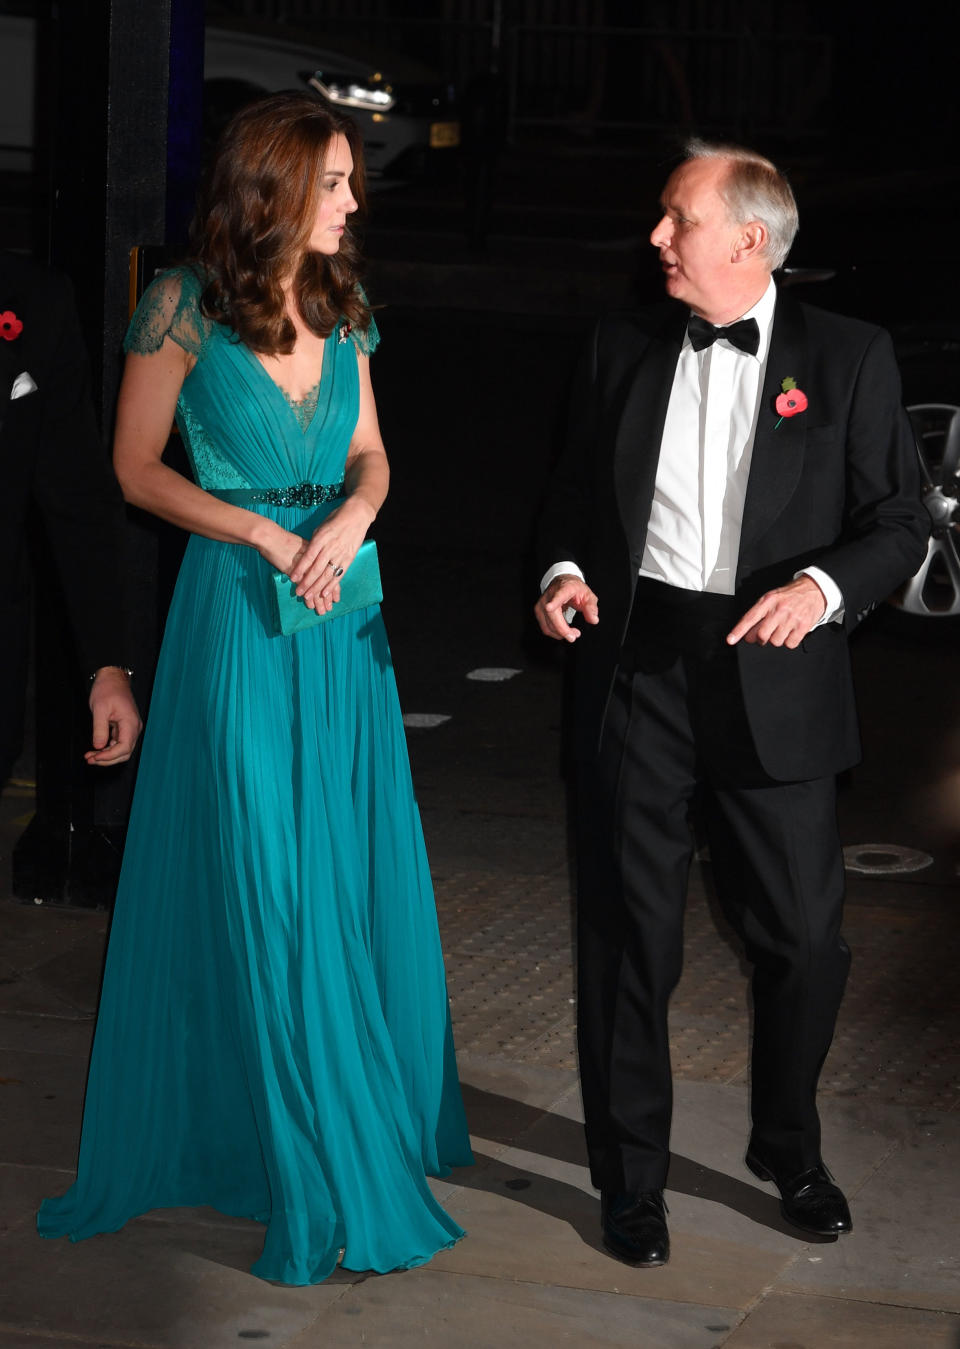 The Duchess of Cambridge talks with the chief executive of Tusk, Charles Mayhew. (Photo: PA Wire/PA Images)